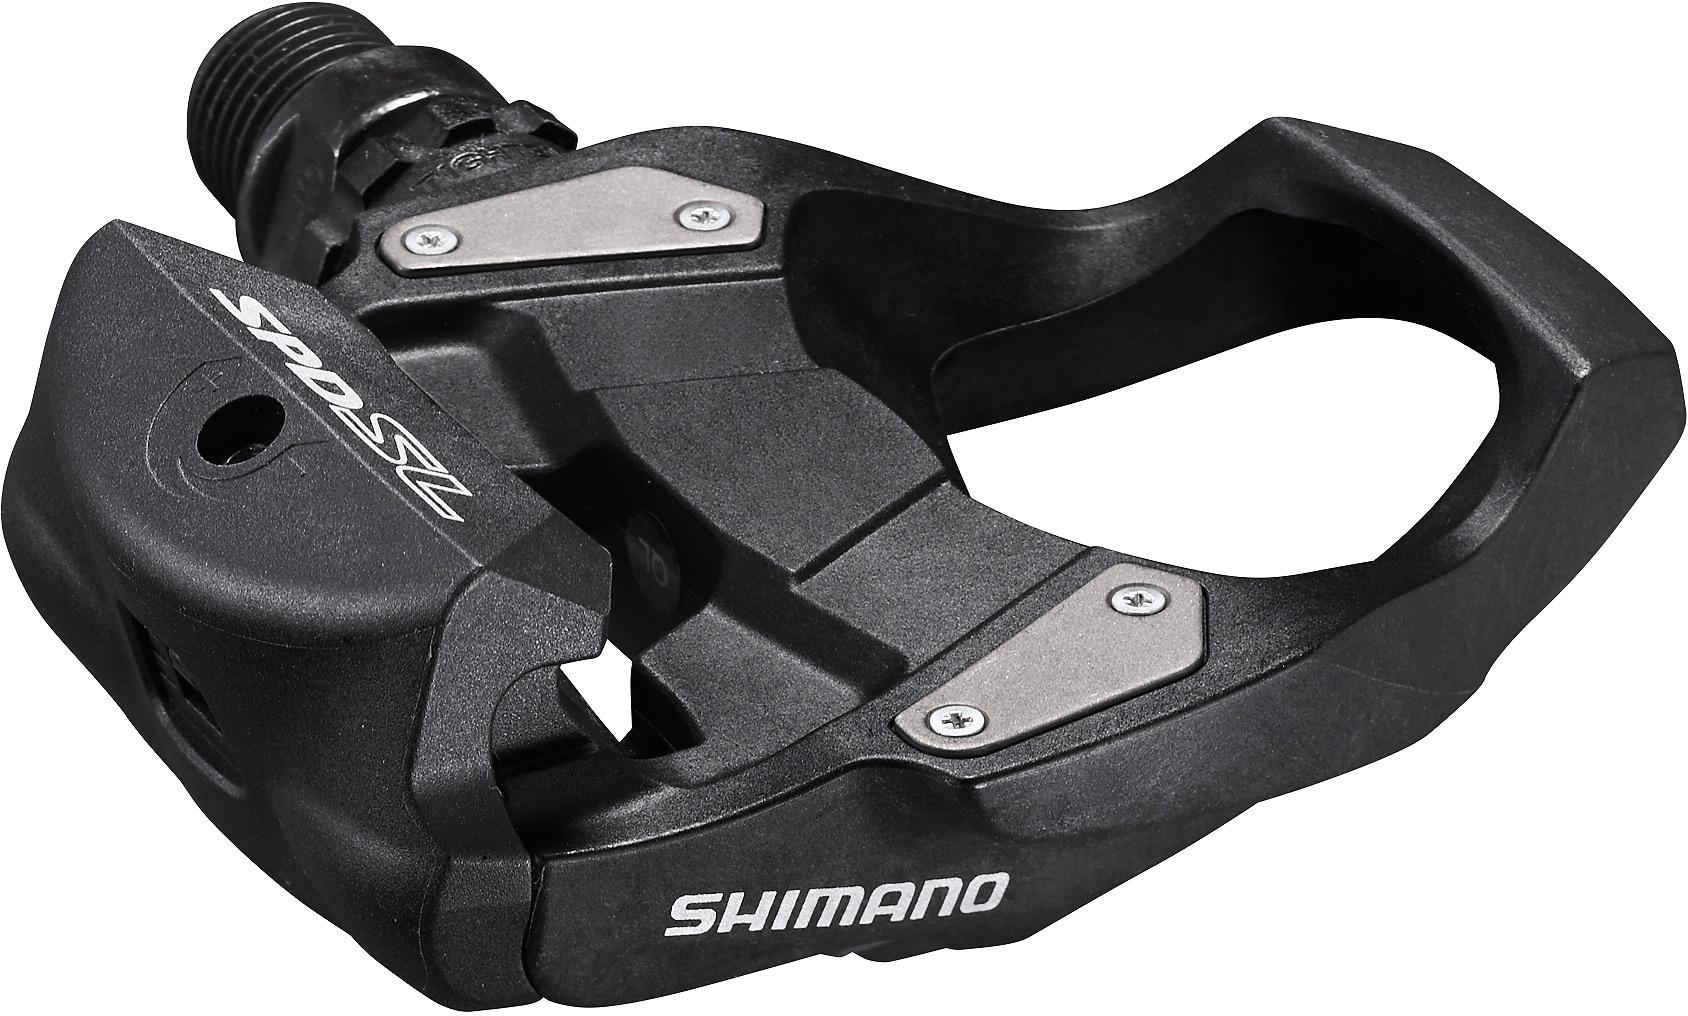 Shimano Rs500 Spd-sl Clipless Road Pedals - Black